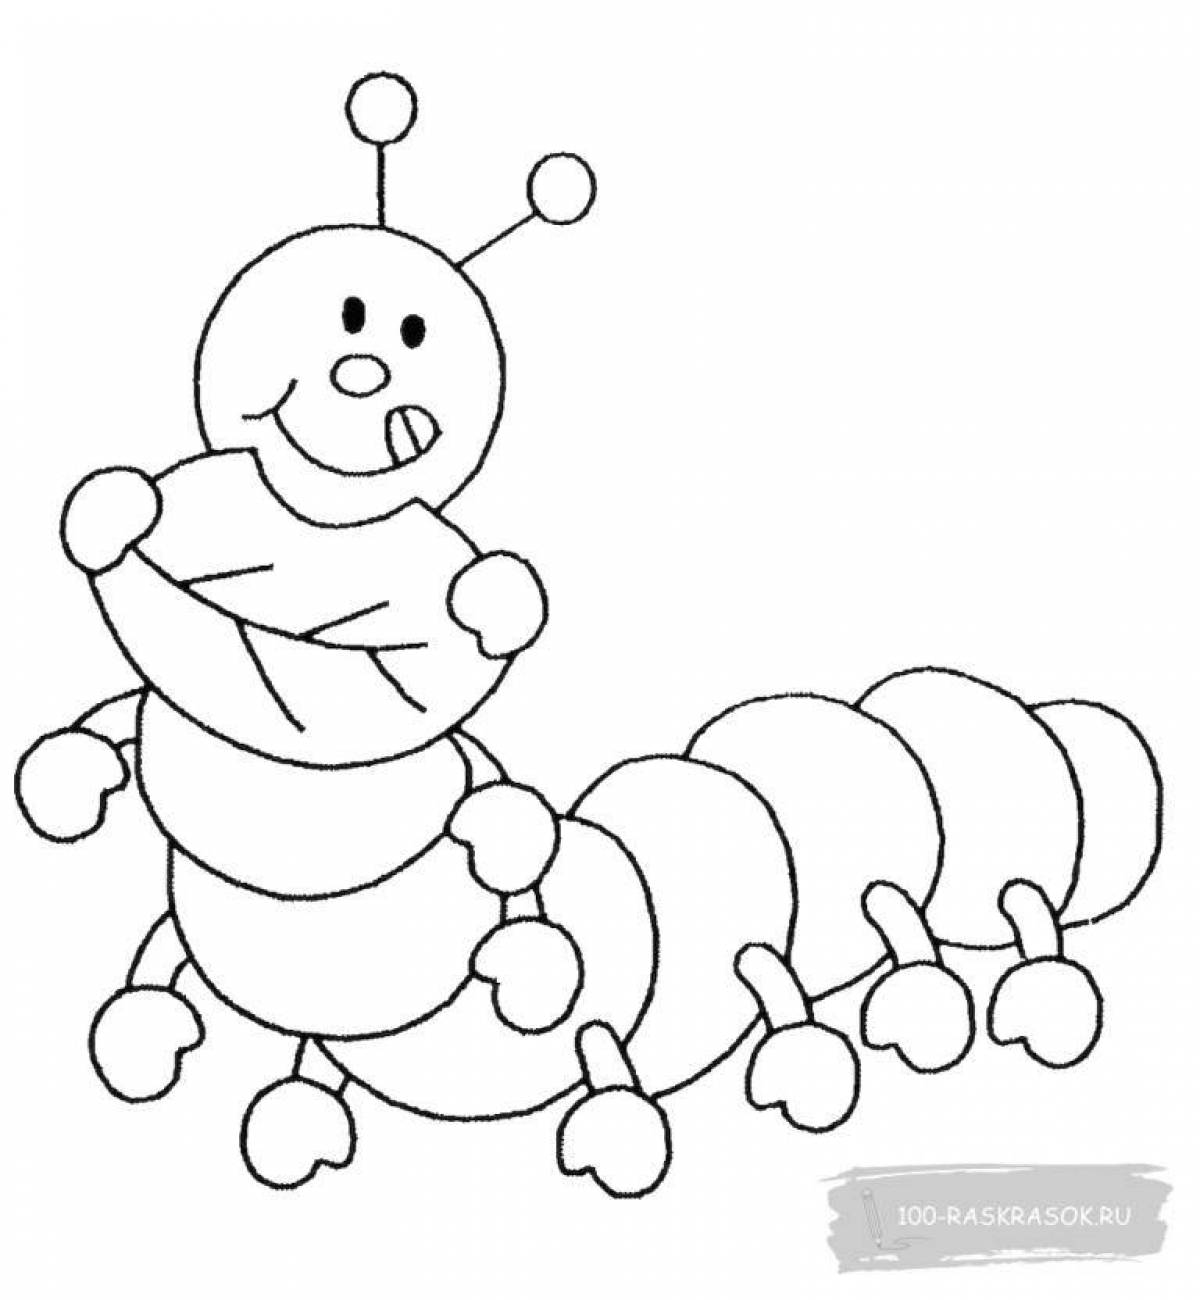 Glorious caterpillar coloring page for preschoolers